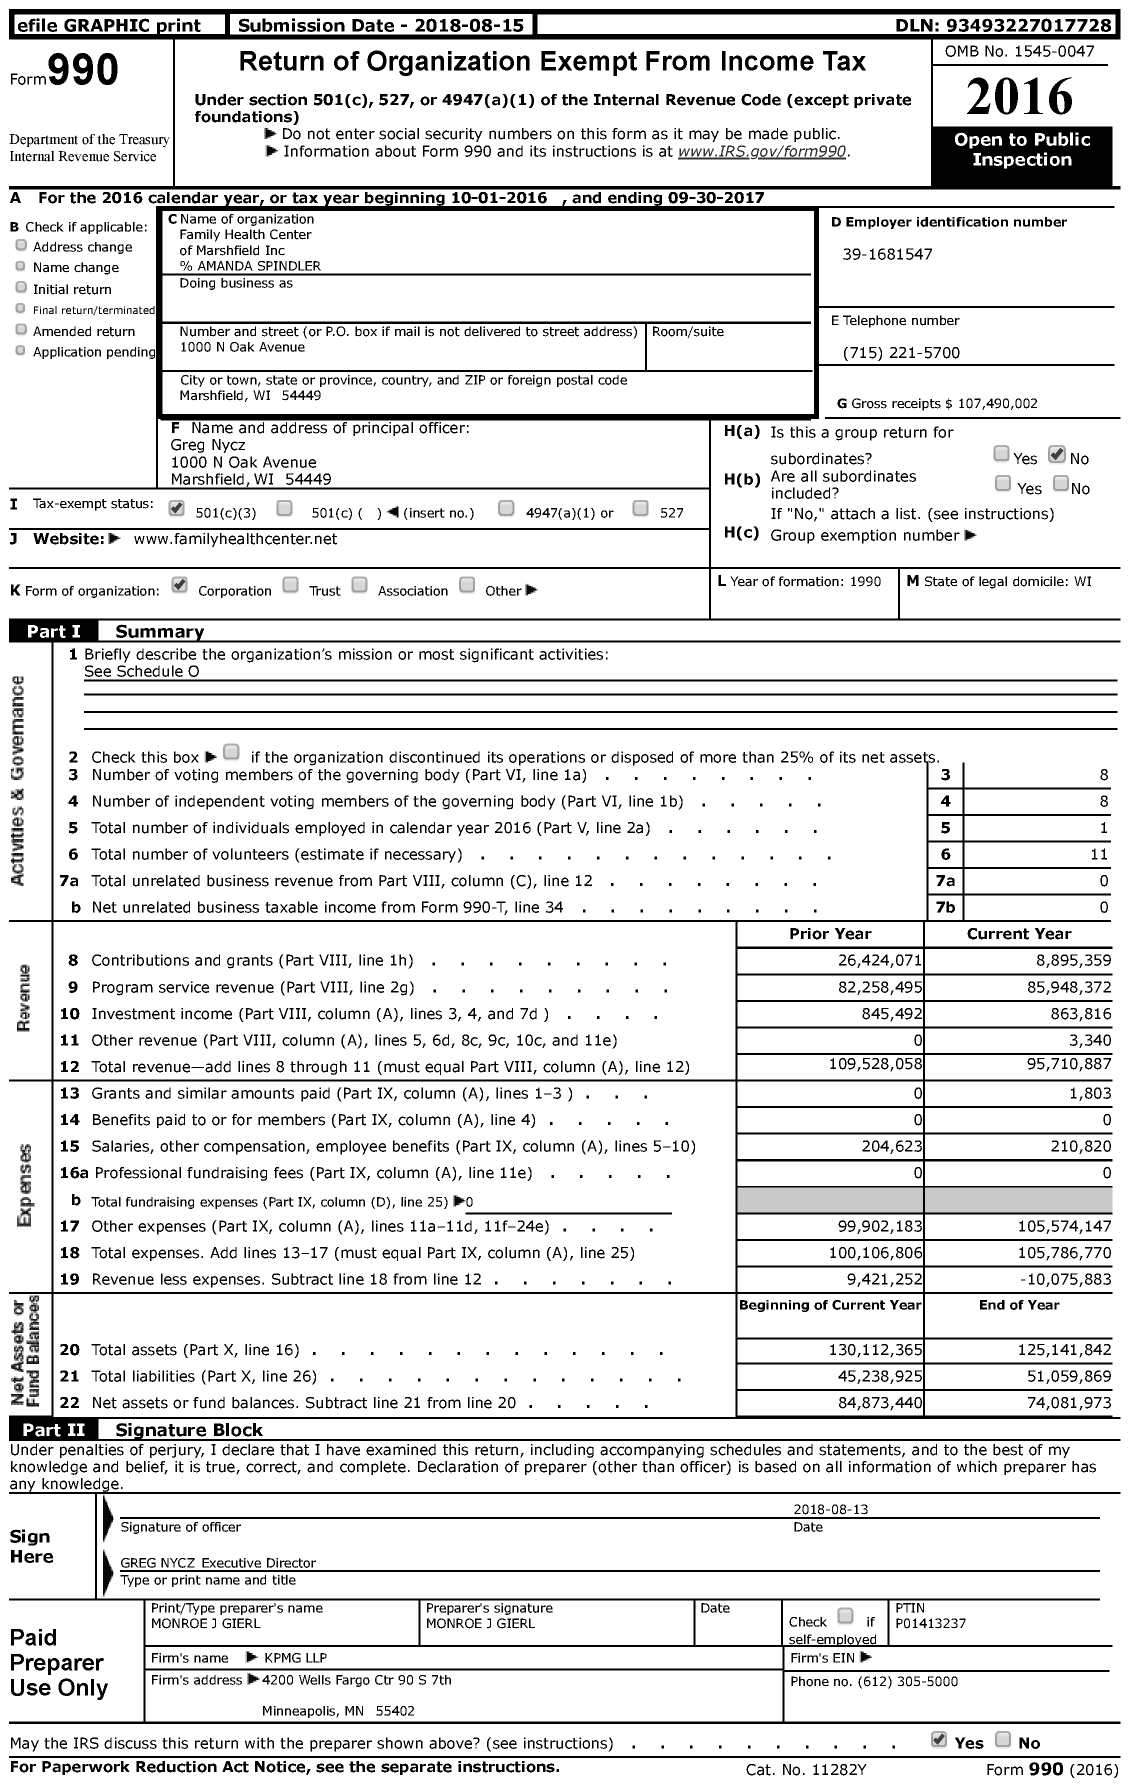 Image of first page of 2016 Form 990 for Family Health Center of Marshfield (FHC)